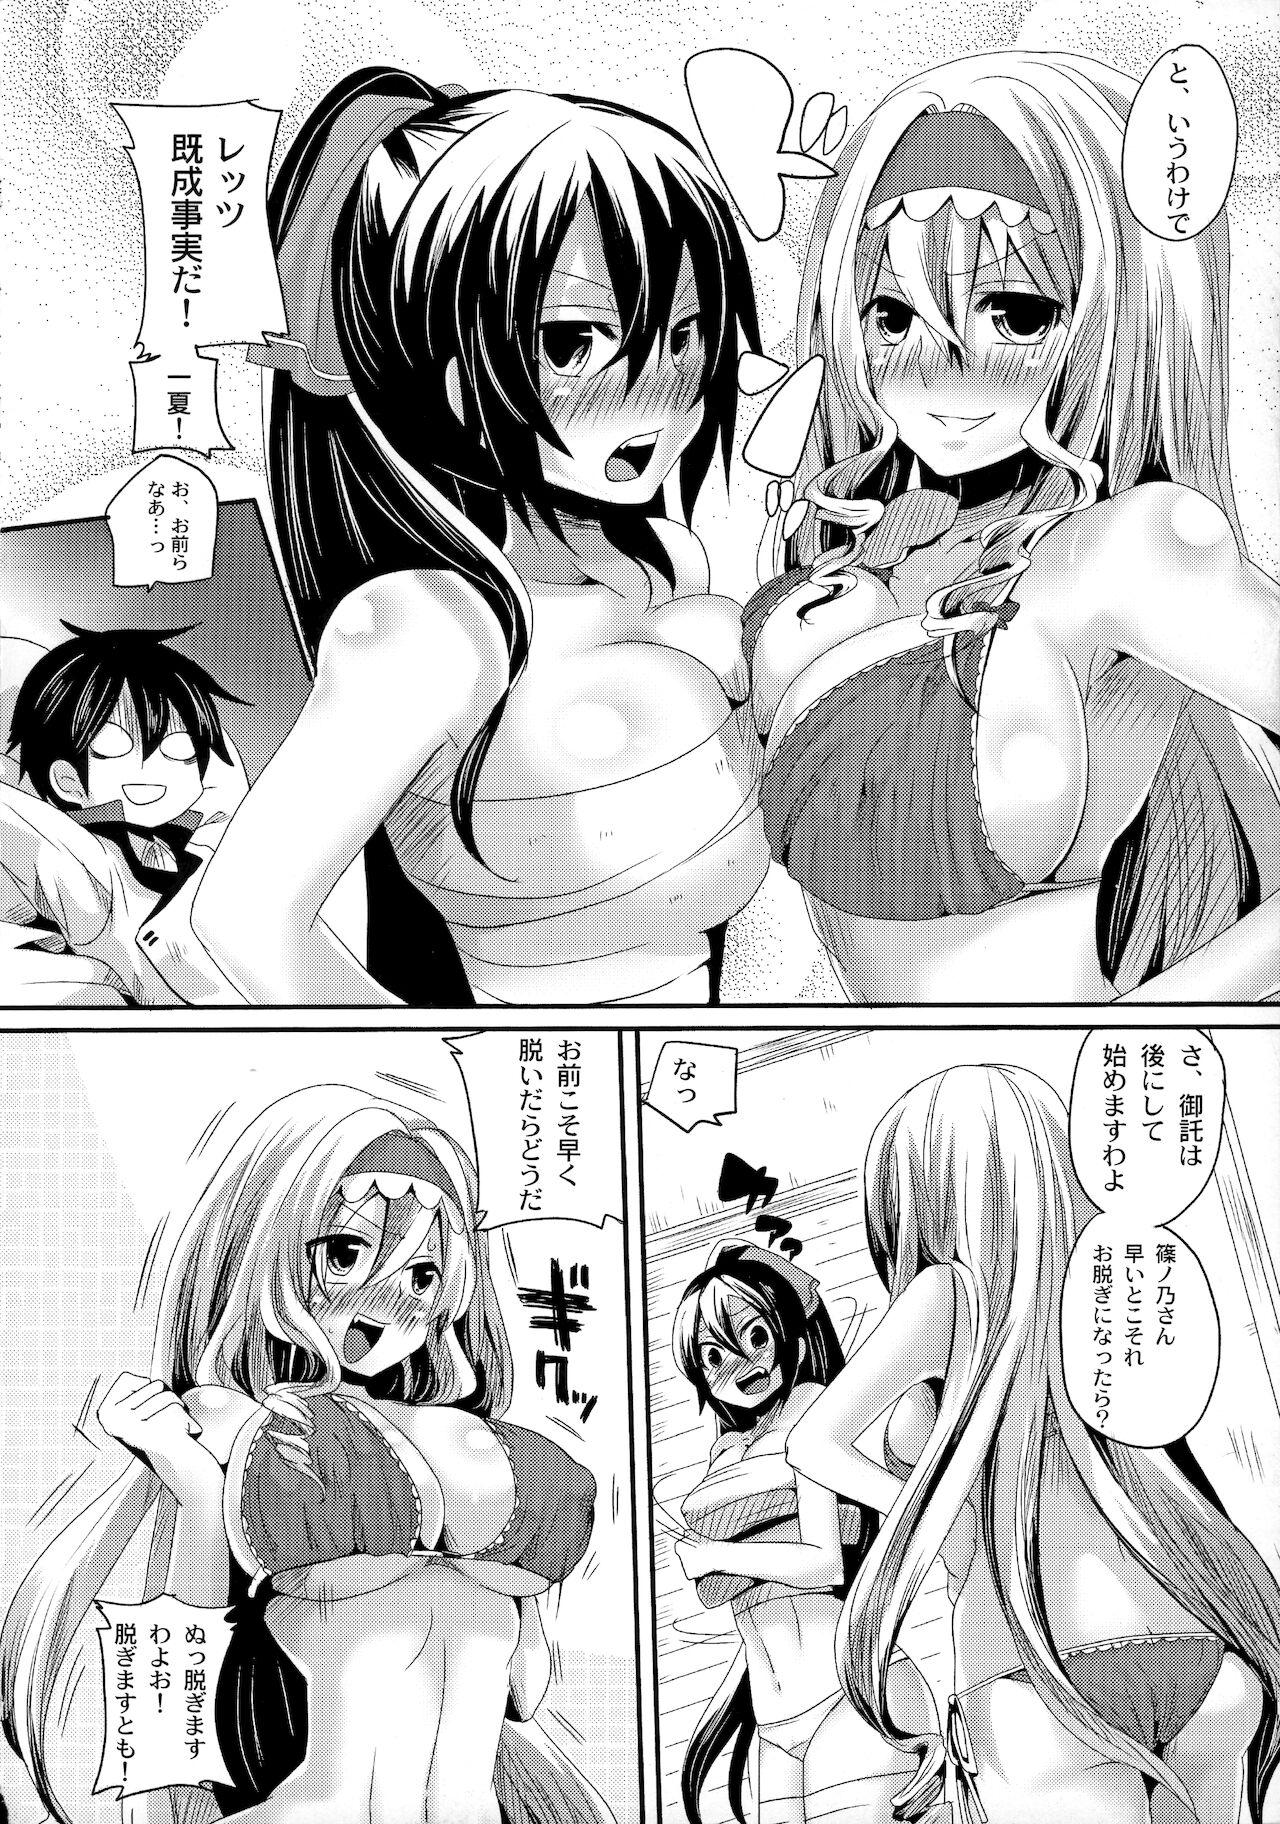 Clip Infinit Love - Infinite stratos Chaturbate - Page 5